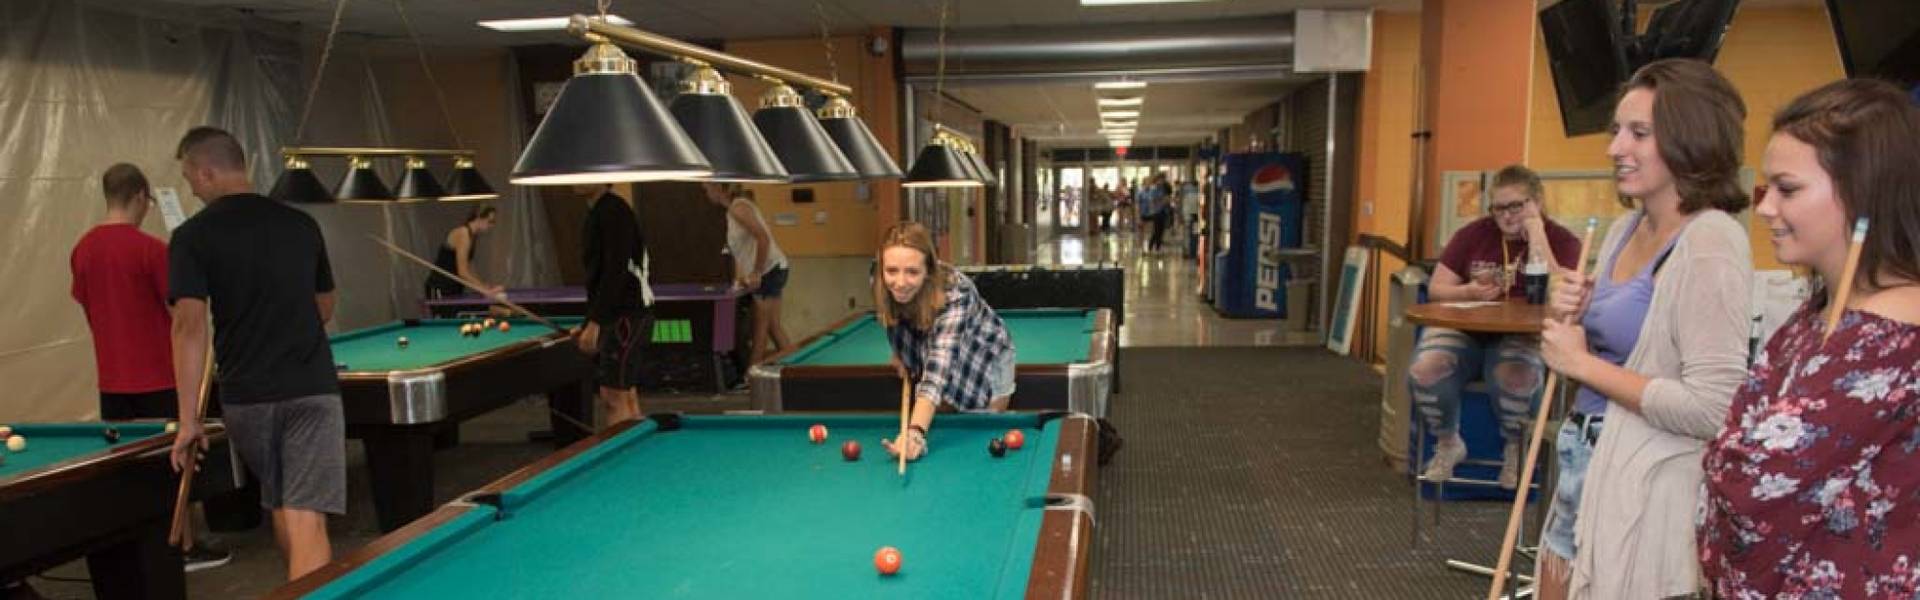 Students playing pool in the Hilltop Billiards Center